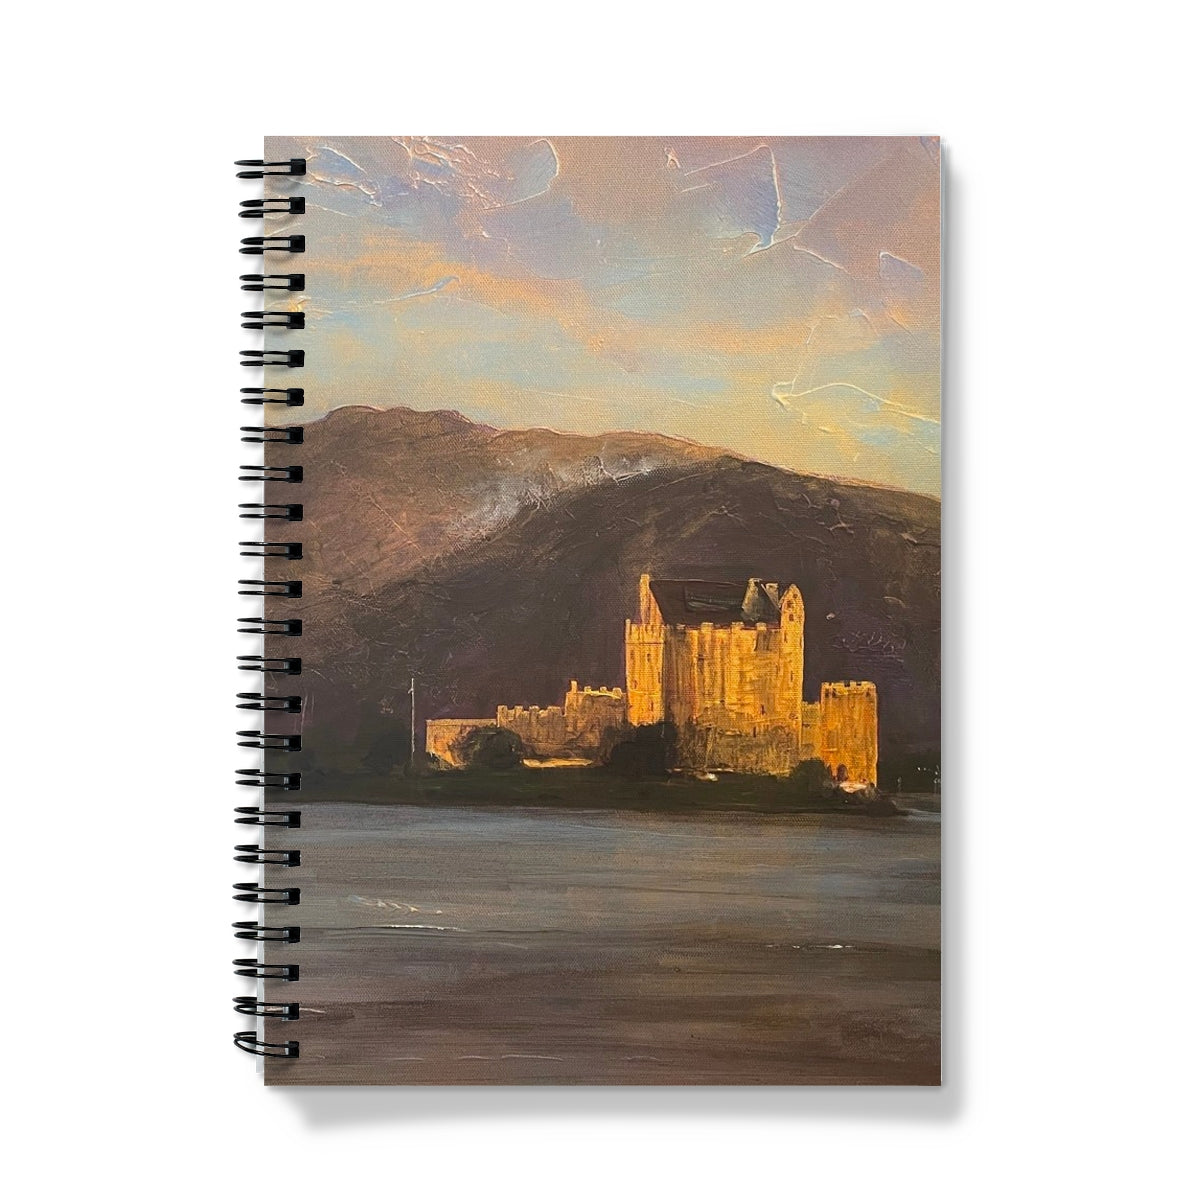 Eilean Donan Castle Art Gifts Notebook-Journals & Notebooks-Historic & Iconic Scotland Art Gallery-A5-Graph-Paintings, Prints, Homeware, Art Gifts From Scotland By Scottish Artist Kevin Hunter